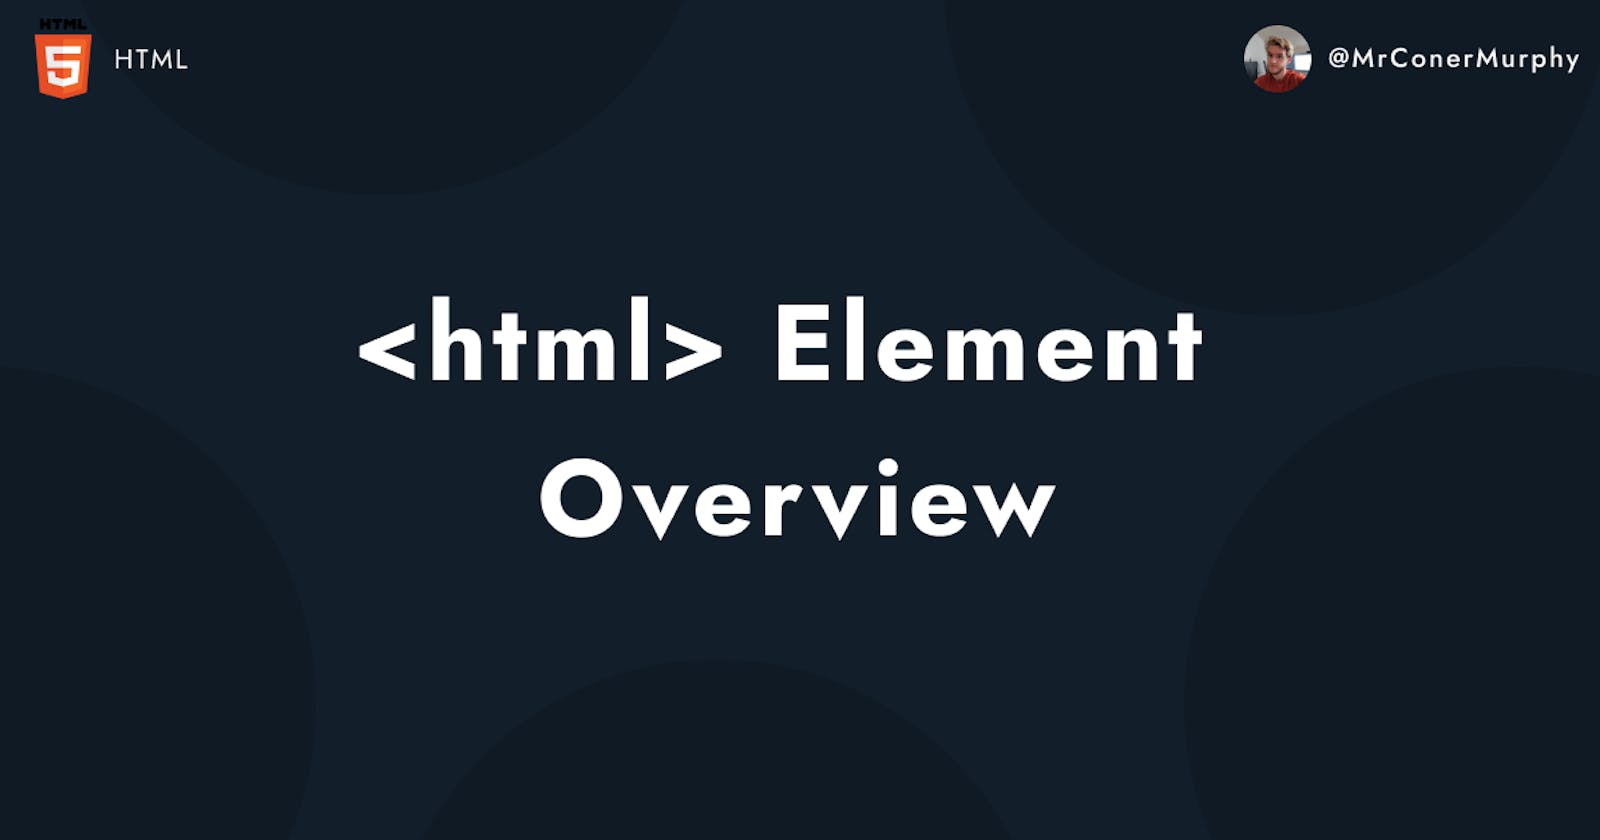 Everything you need to know the <html> element